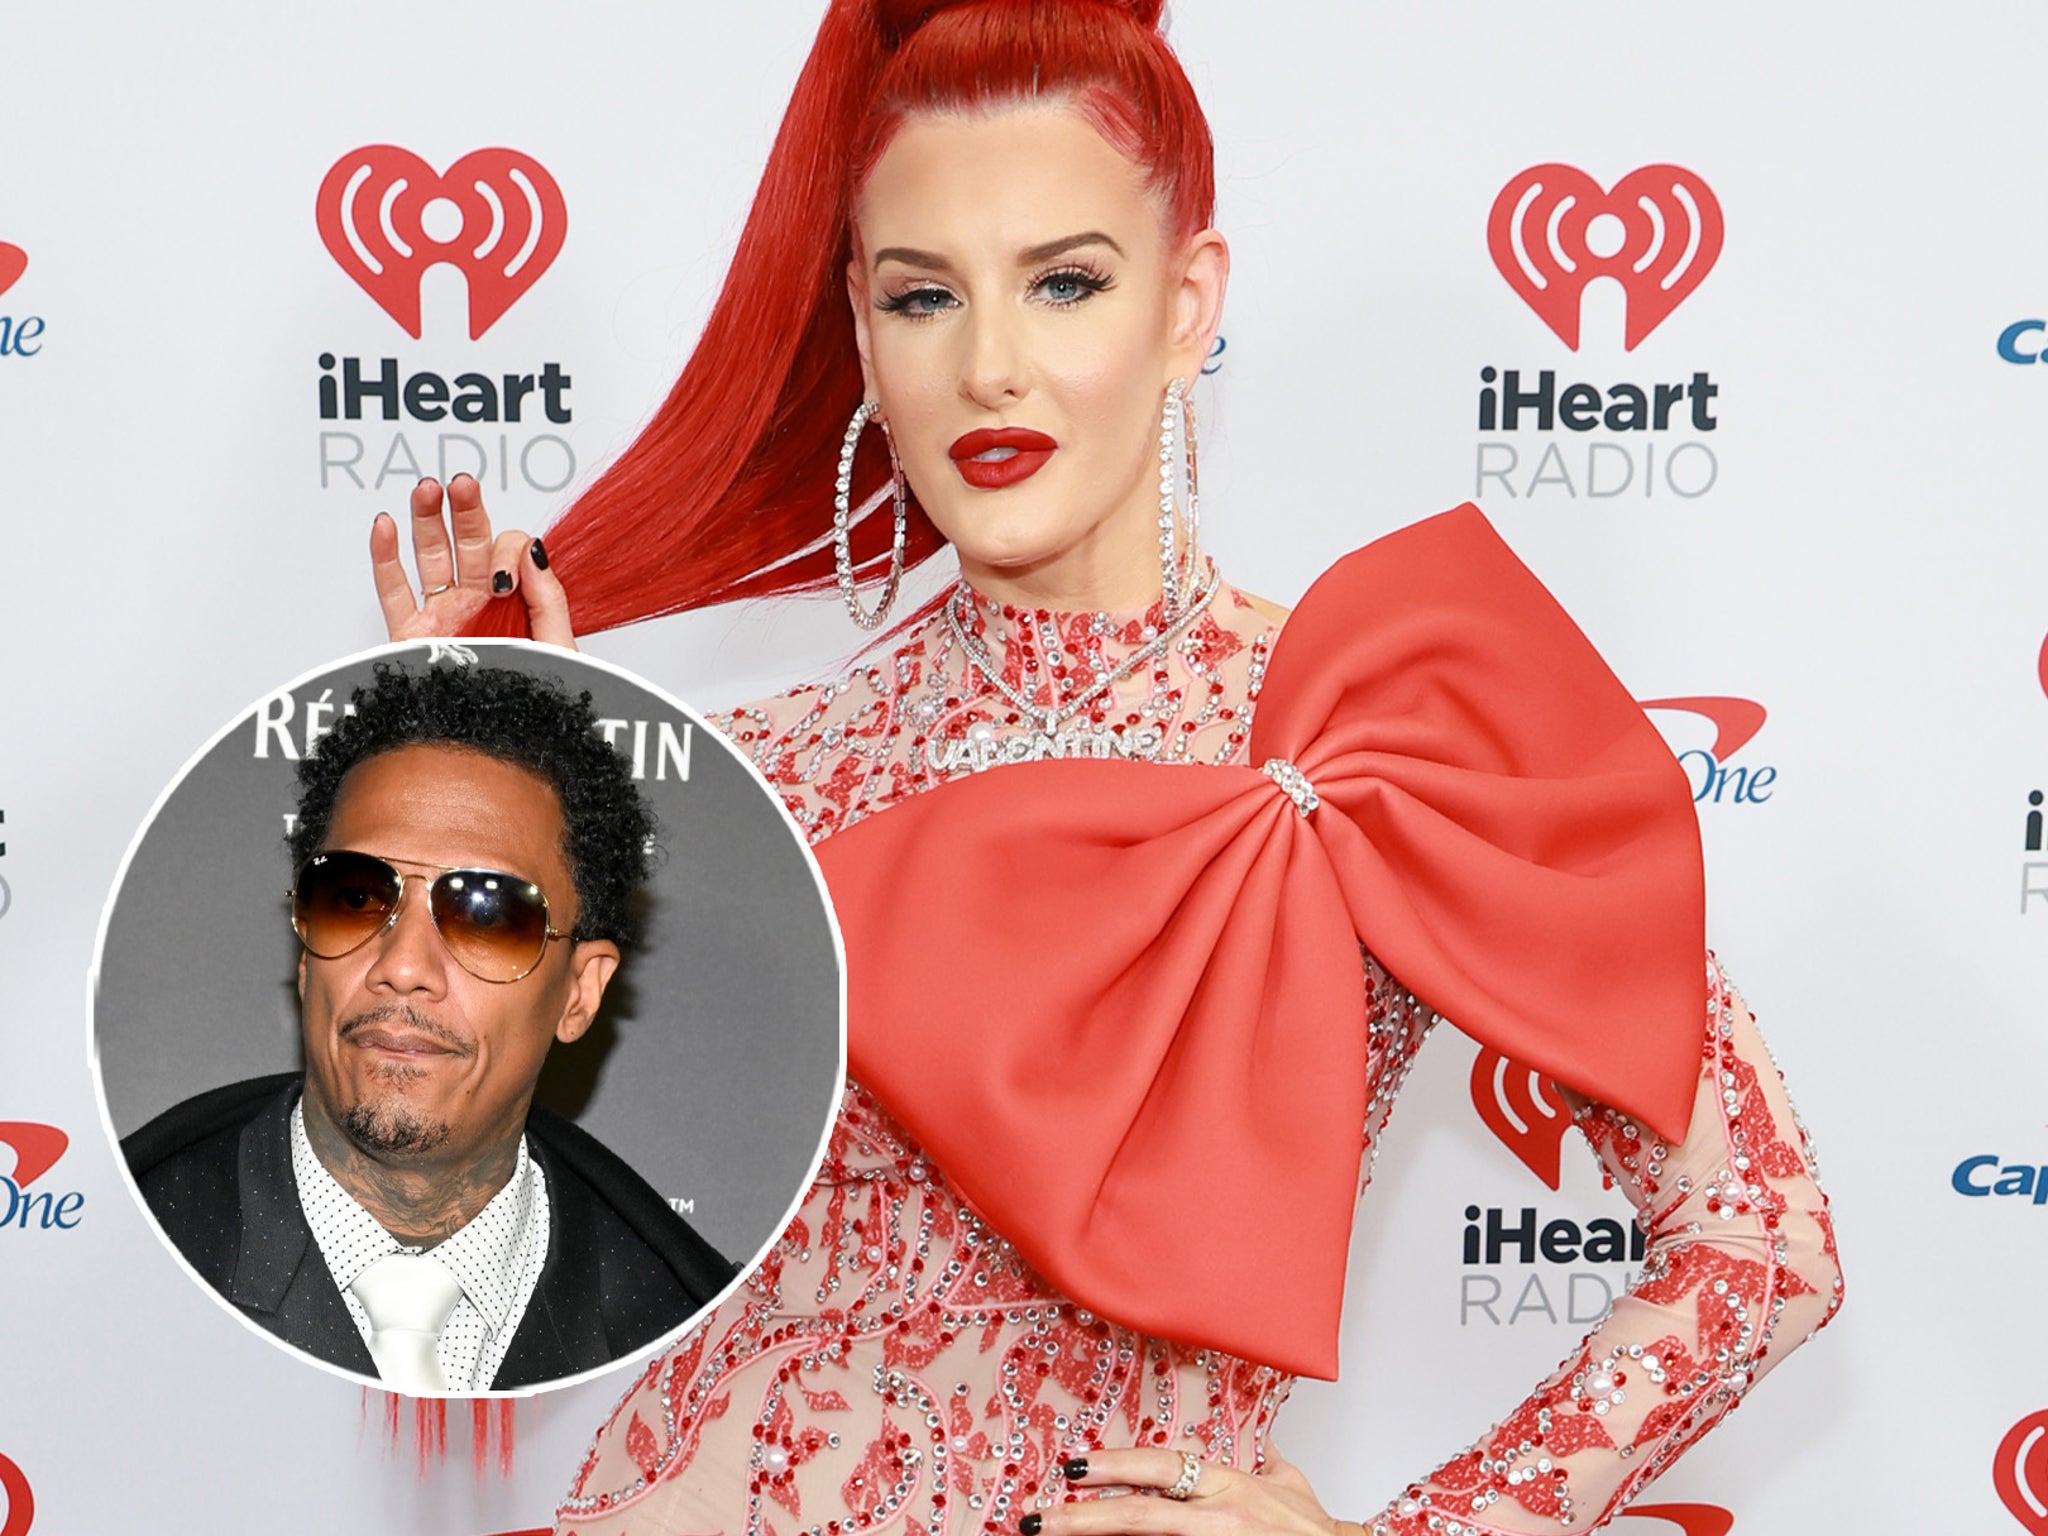 Justina Valentine Says Nick Cannon and His Penis Are Hardest Workers on Planet